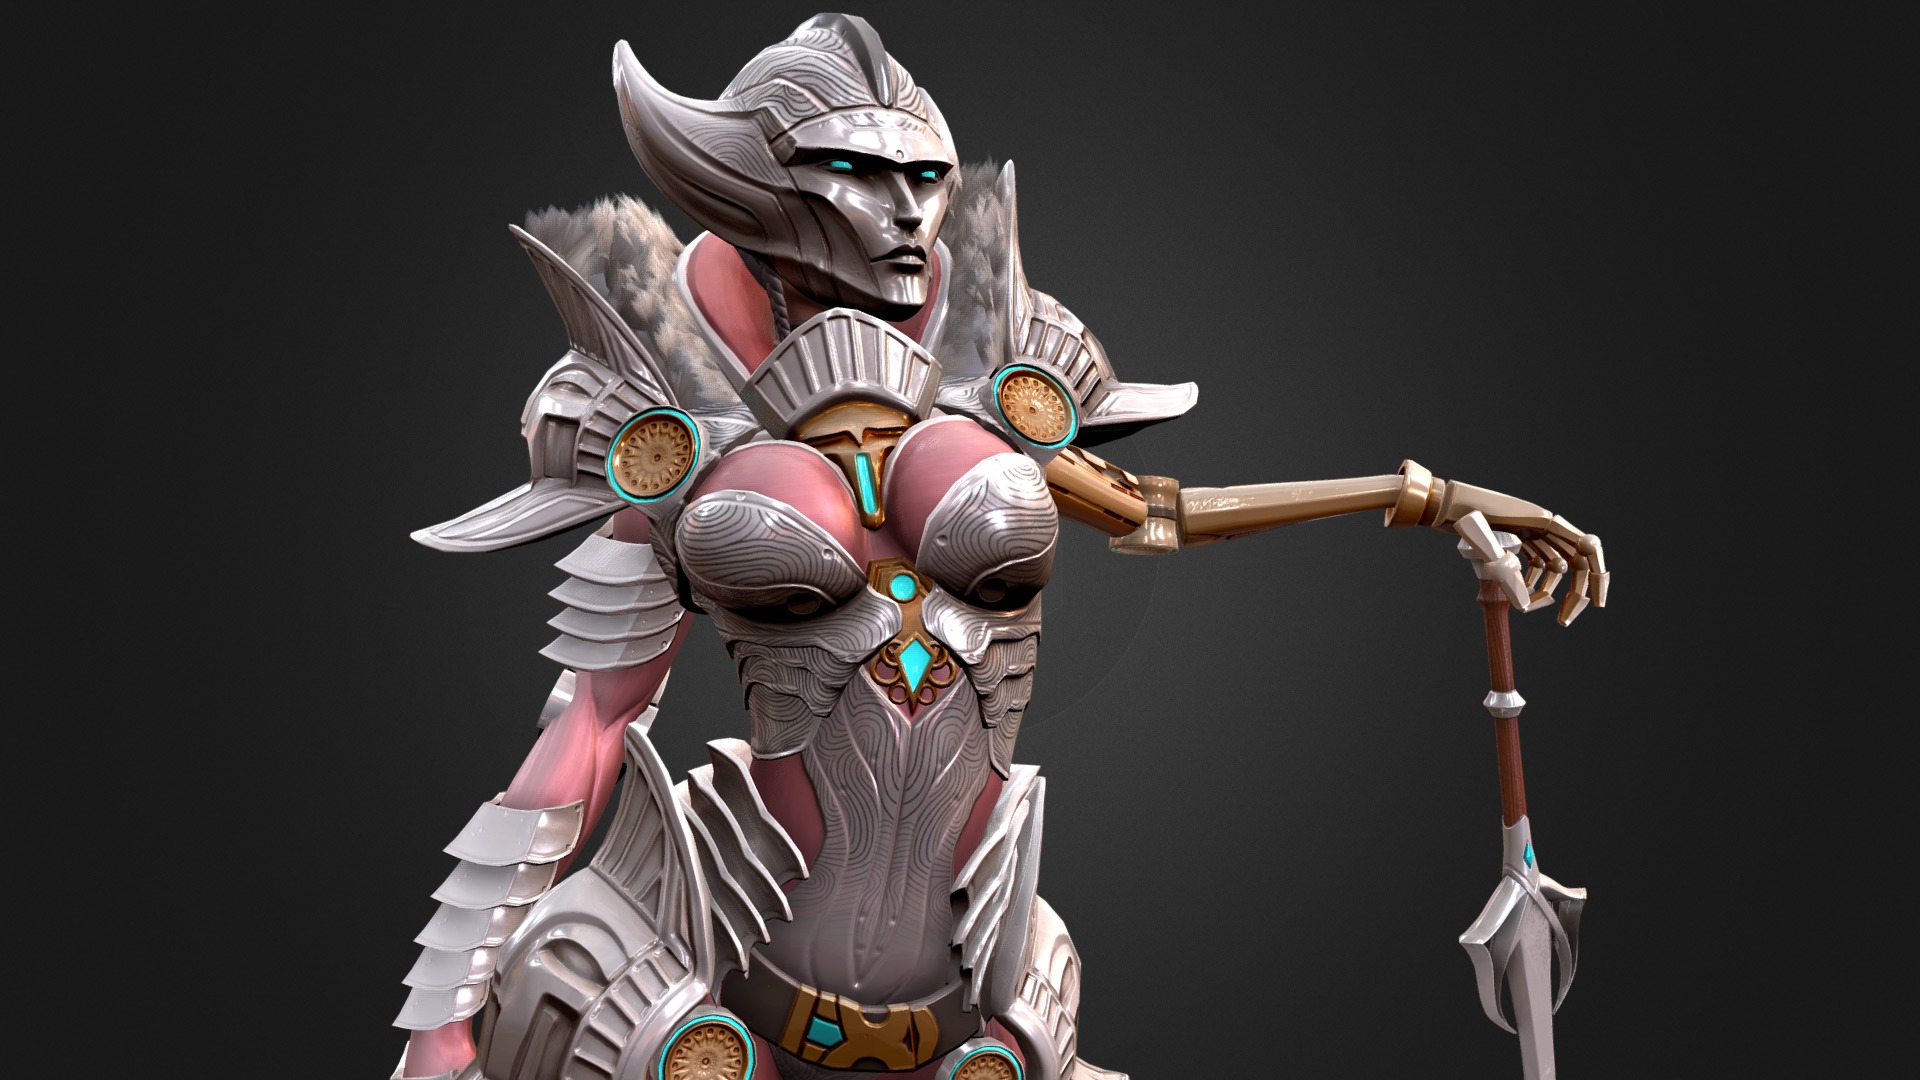 3D model Lady Kushana - This is a 3D model of the Lady Kushana. The 3D model is about a person in a garment holding a sword.